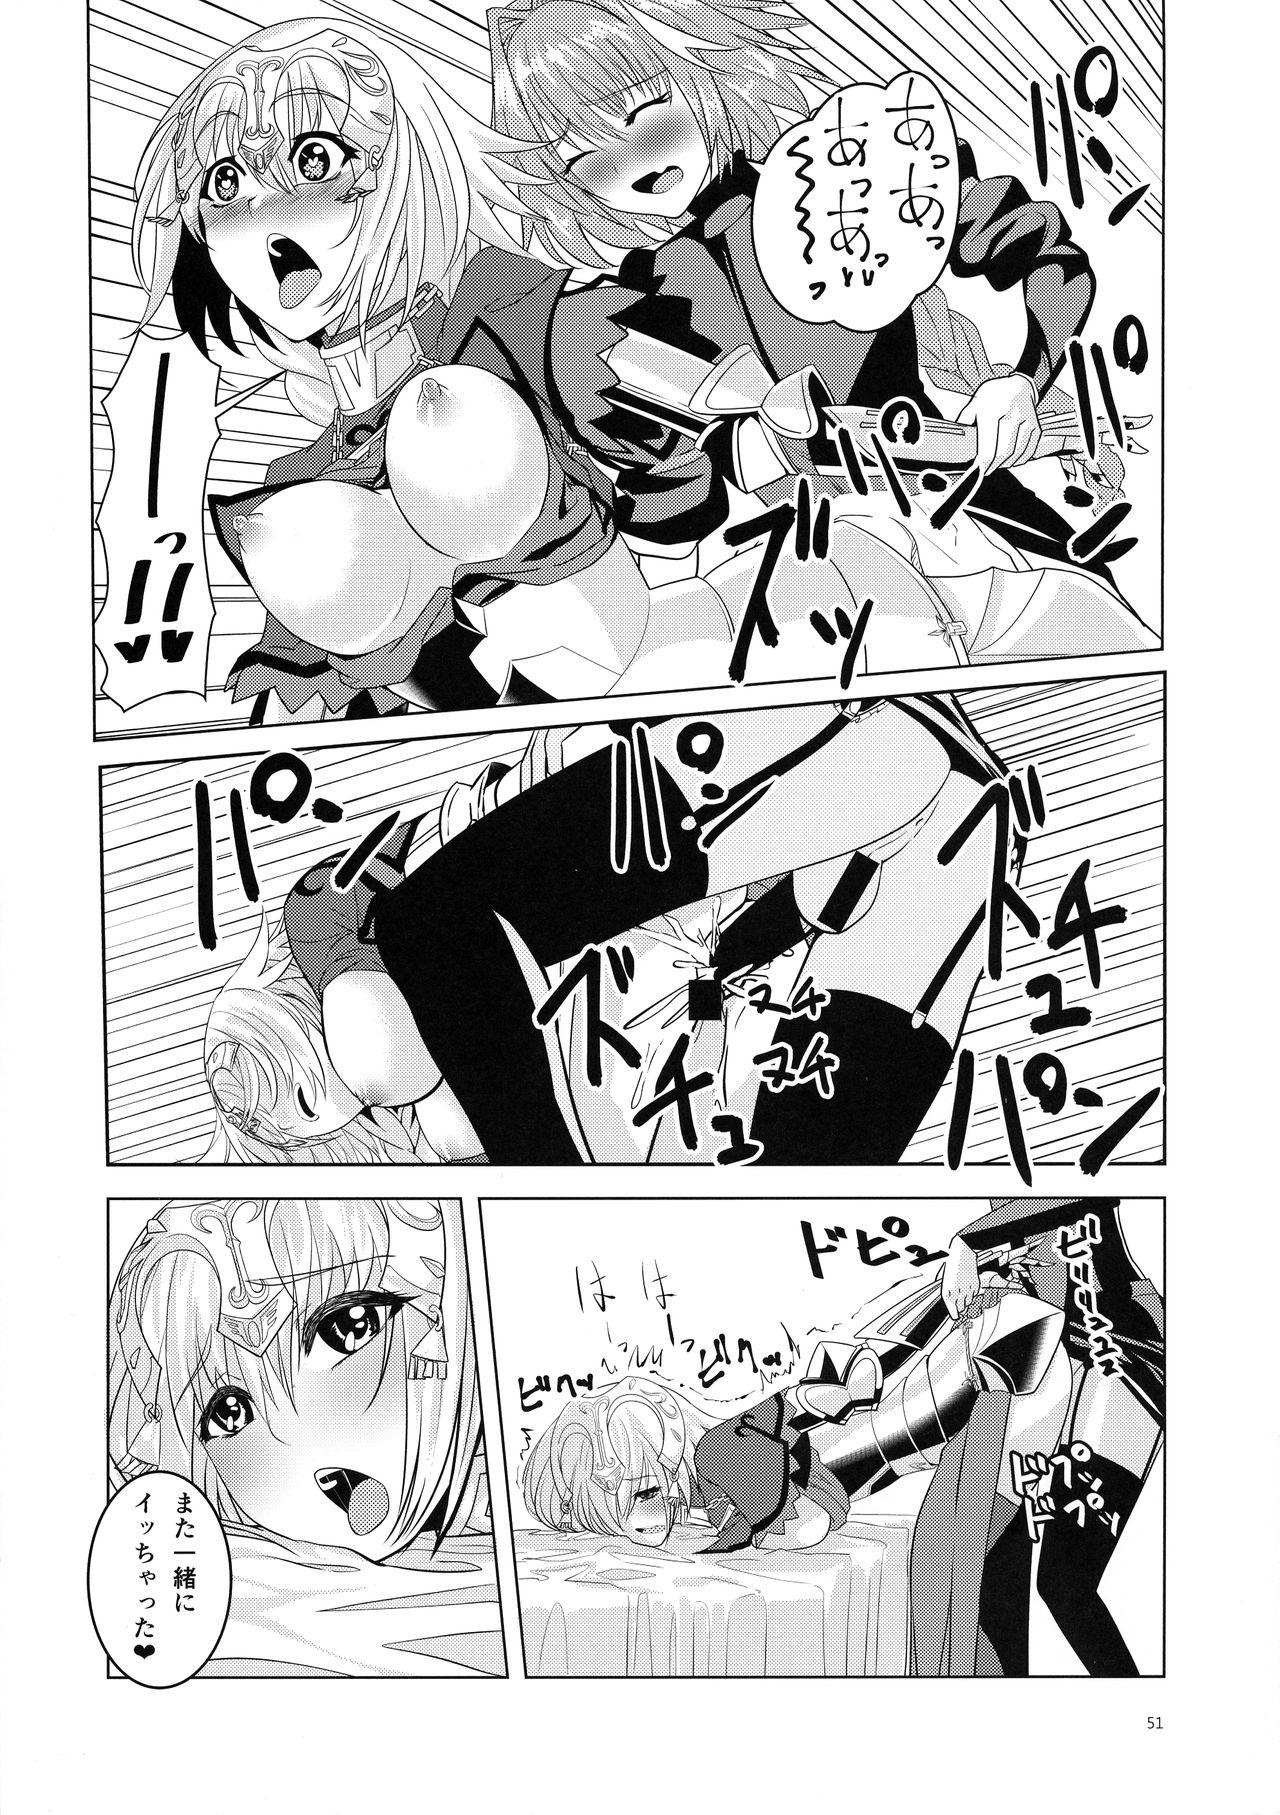 Matching Spirits - Jeanne and Astolfo have sex 47